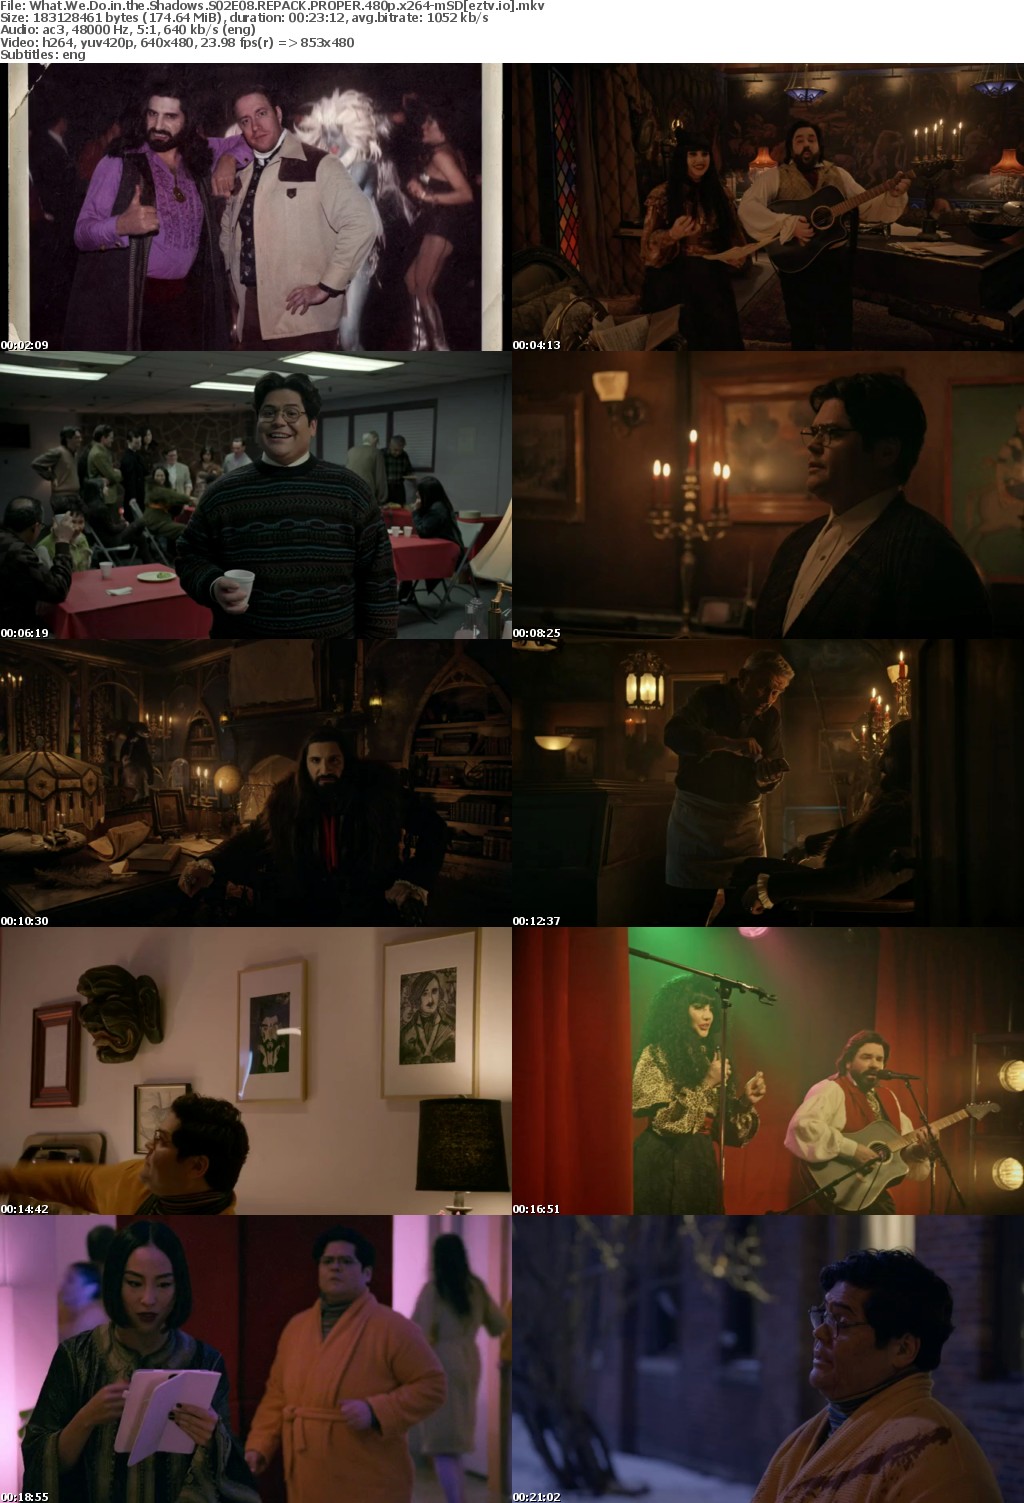 What We Do in the Shadows S02E08 REPACK PROPER 480p x264-mSD